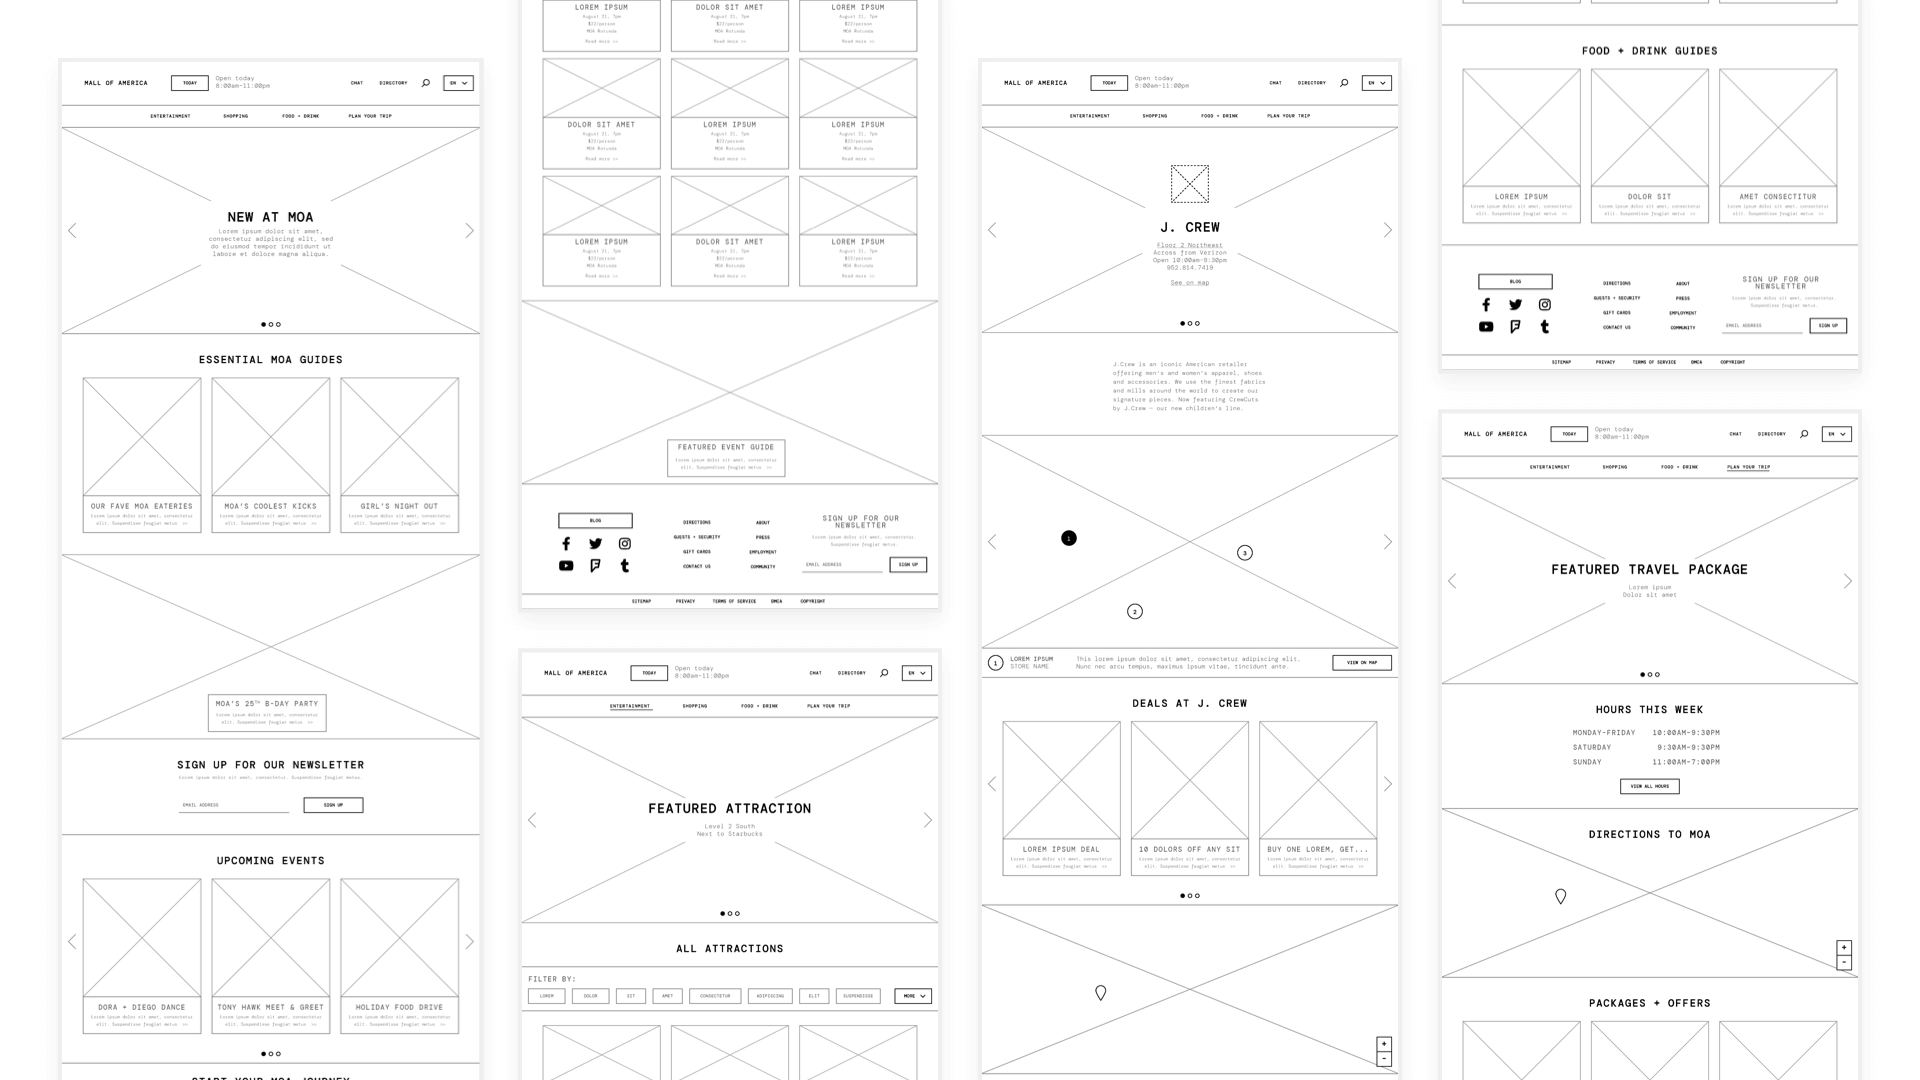 Wireframes of the redesigned Mall of America website